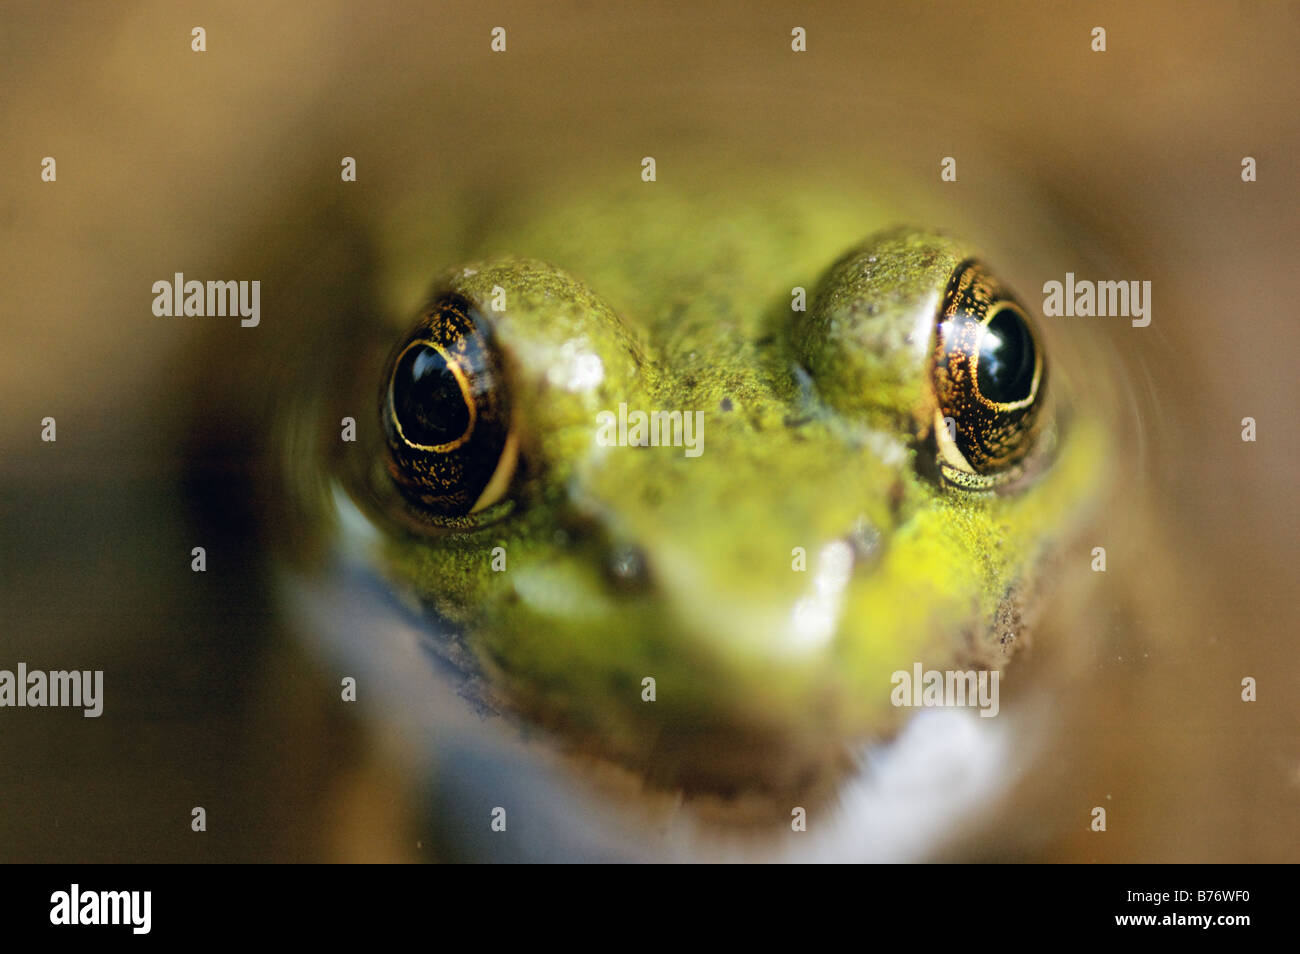 A close up of a frog in water Stock Photo